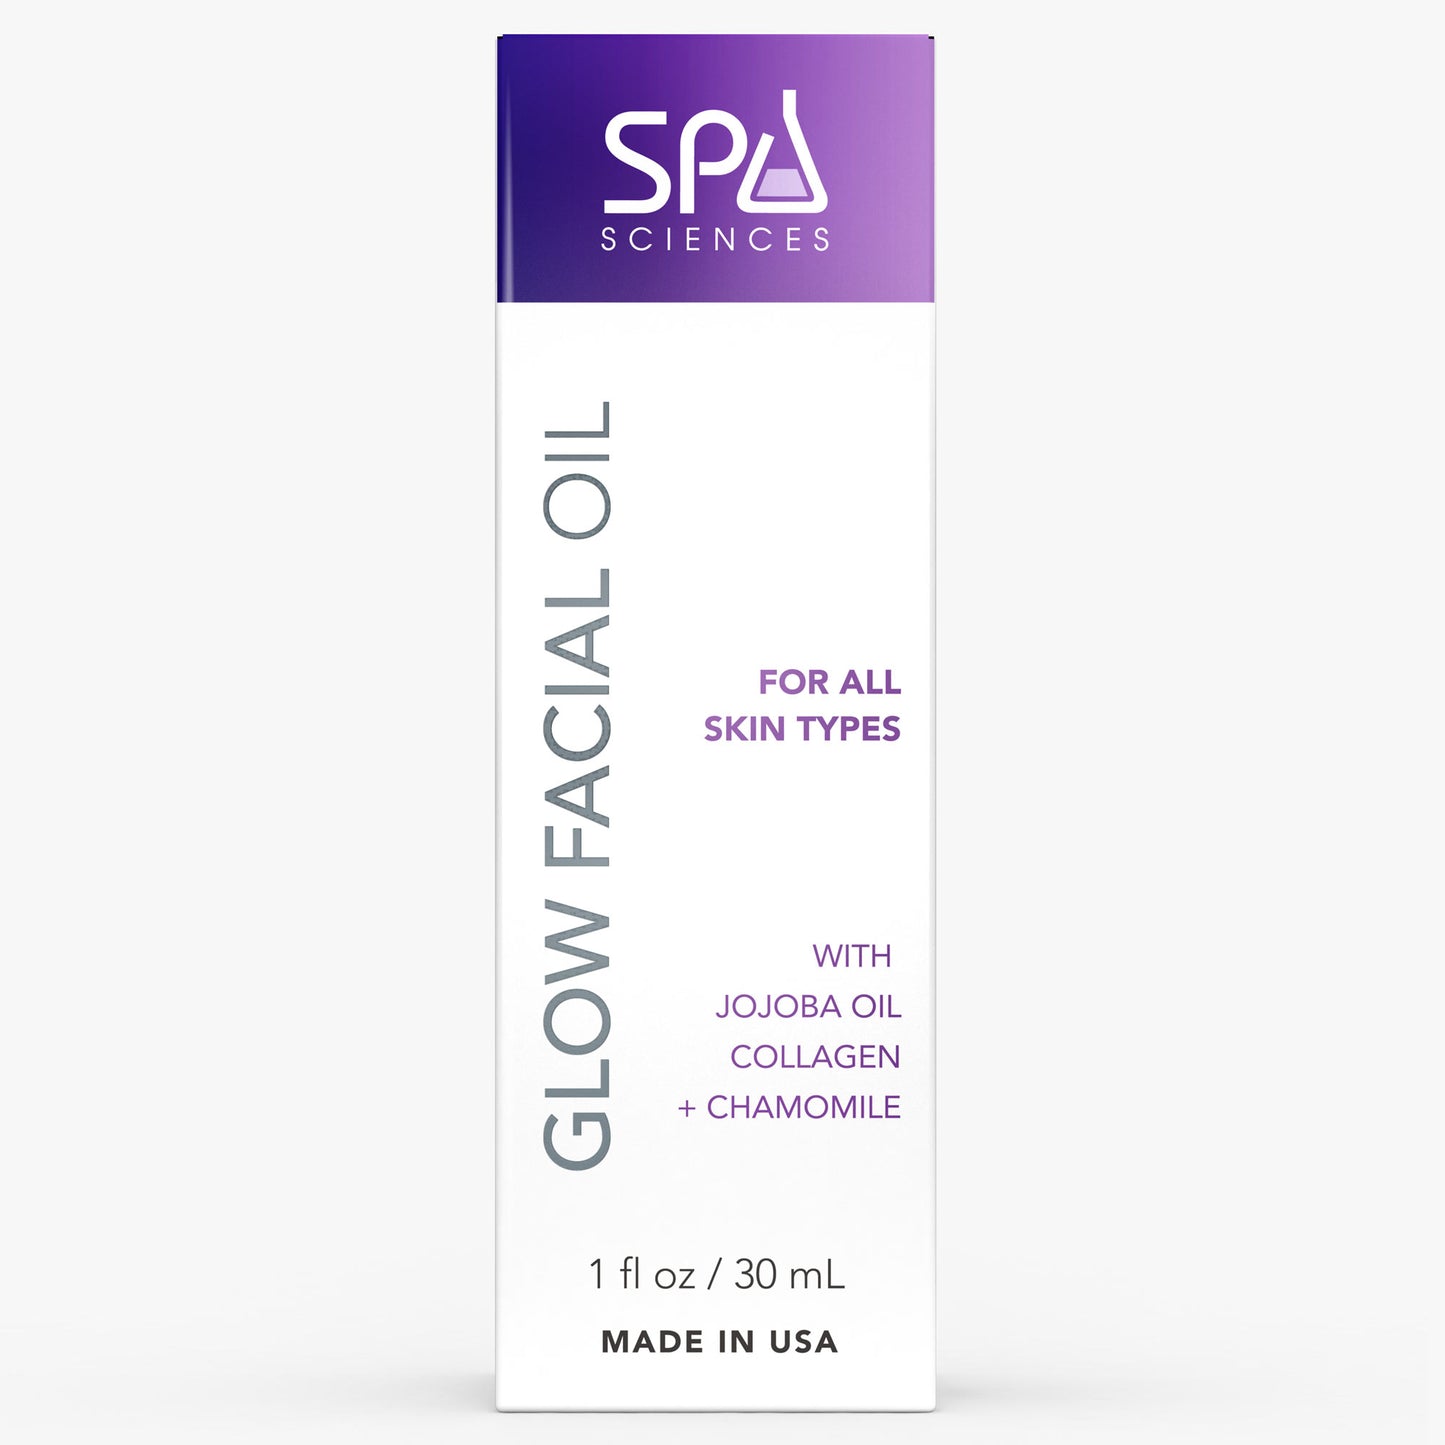 A bottle of Spa Sciences Glow Facial Oil with antioxidants on a white background.